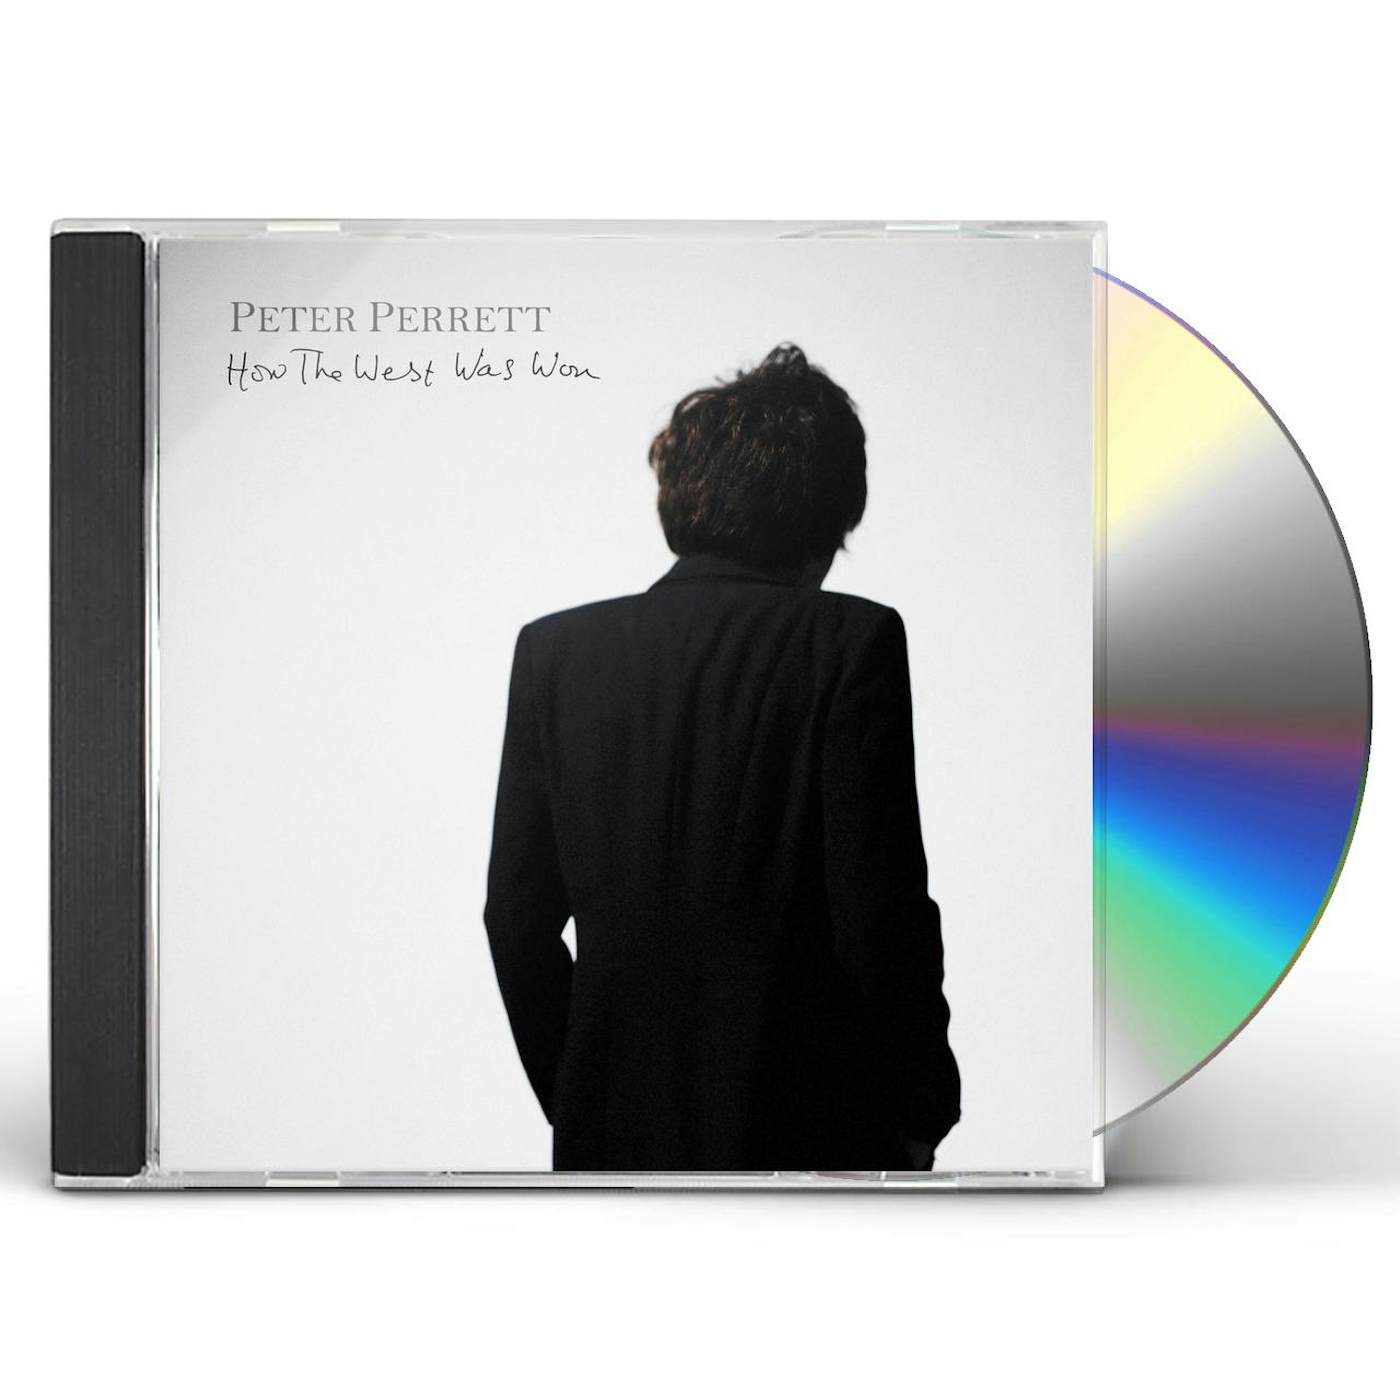 Peter Perrett HOW THE WEST WAS WON CD